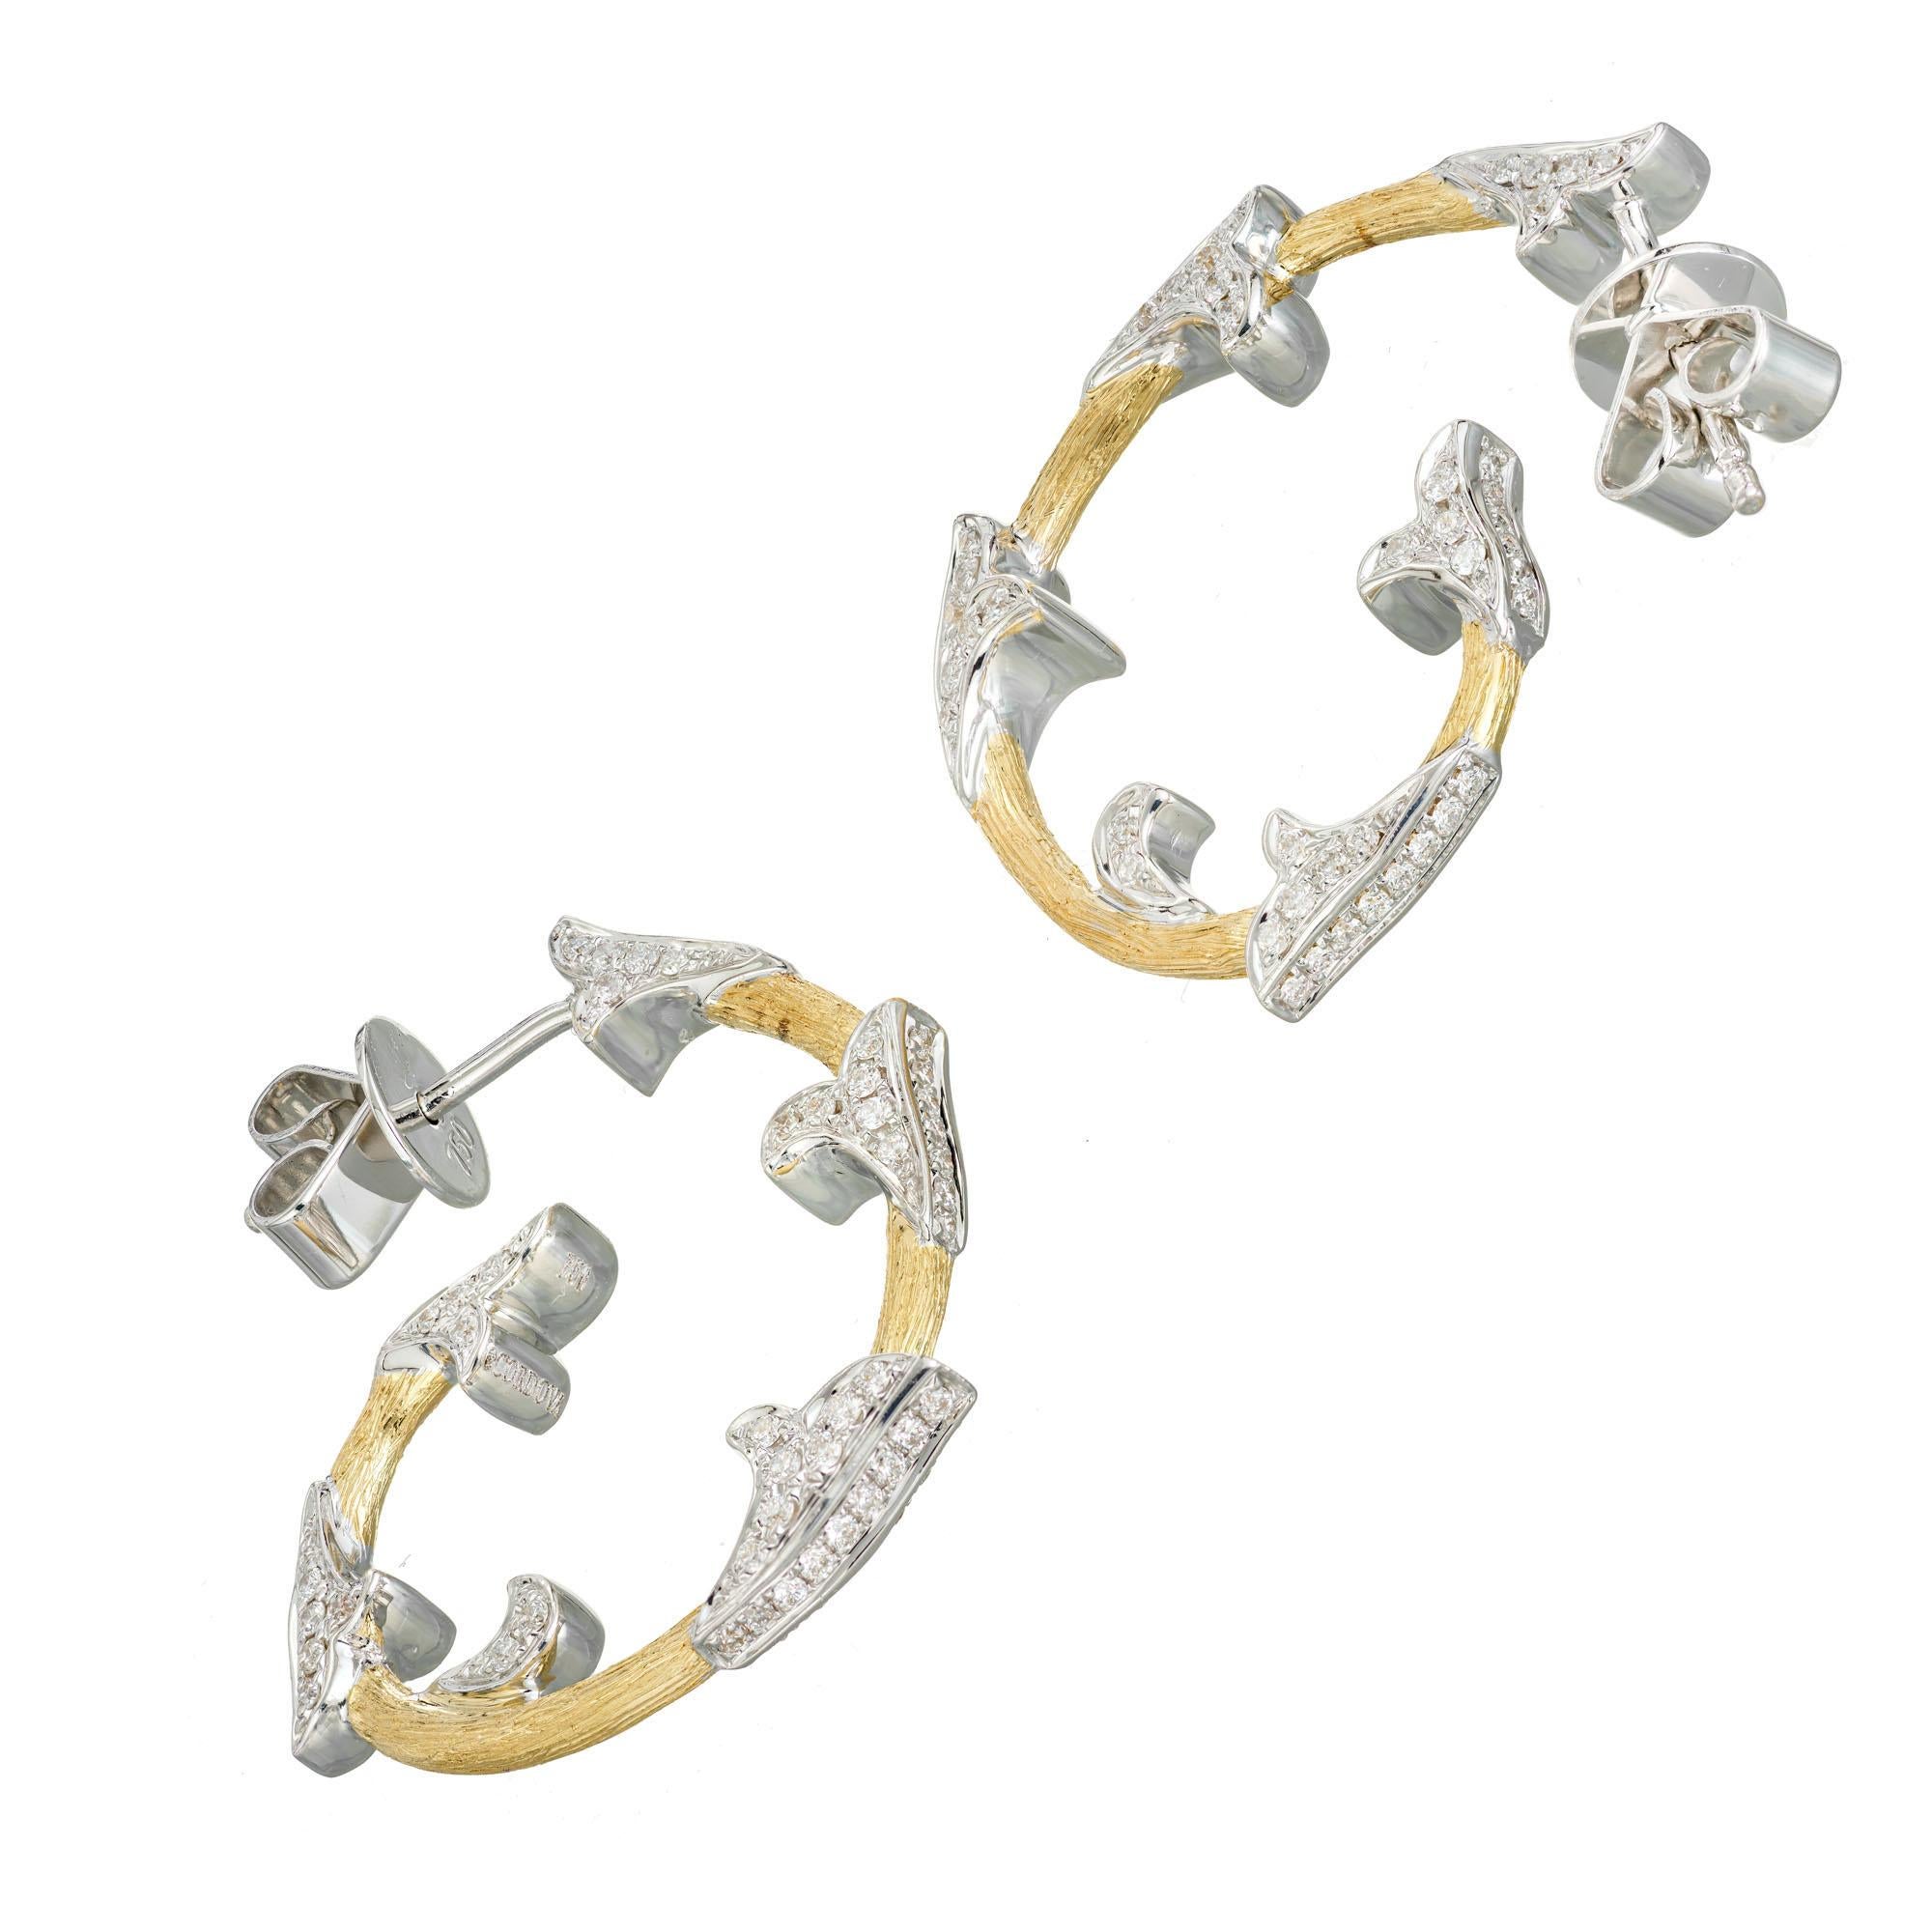 Cordova 18k white and yellow gold hoop earrings with post style tops. 190 round full cut diamonds set in white gold along yellow gold hoops. 

190 round full cut diamonds, approx. total weight .63cts, F, VS
18k yellow and white gold
Tested: